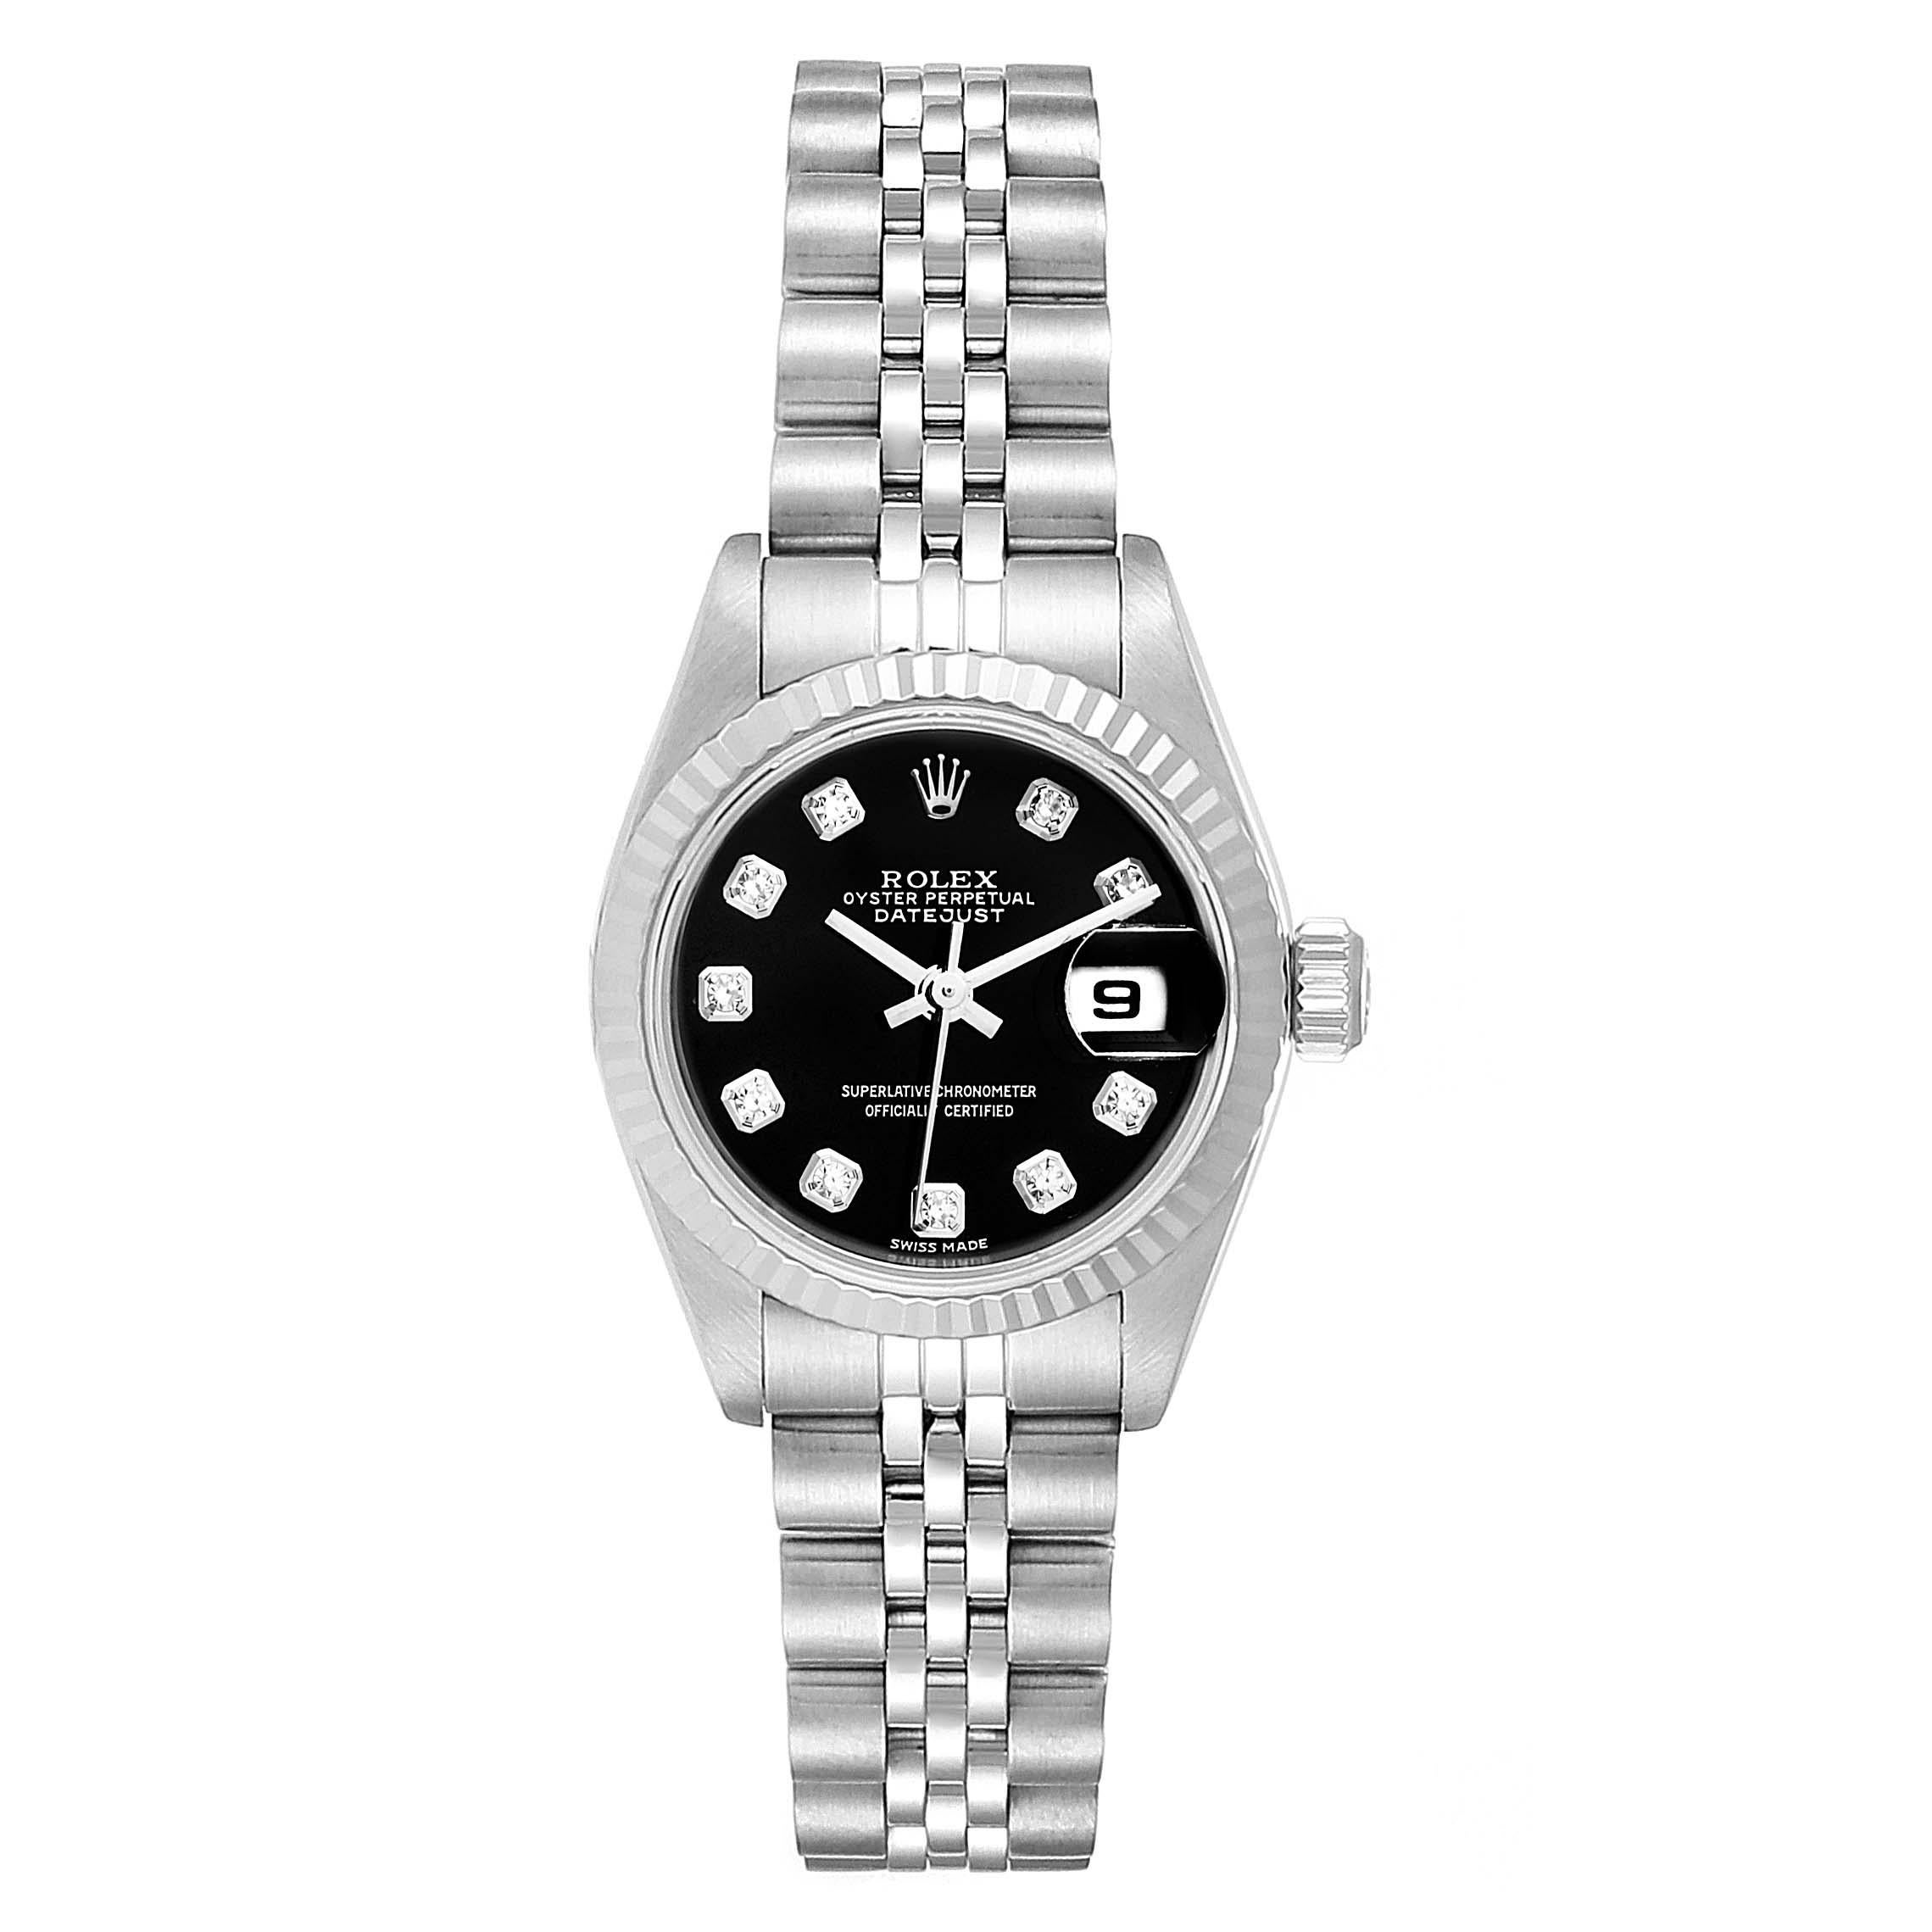 Rolex Datejust Steel White Gold Black Diamond Dial Ladies Watch 79174. Officially certified chronometer self-winding movement. Stainless steel oyster case 26.0 mm in diameter. Rolex logo on a crown. 18k white gold fluted bezel. Scratch resistant